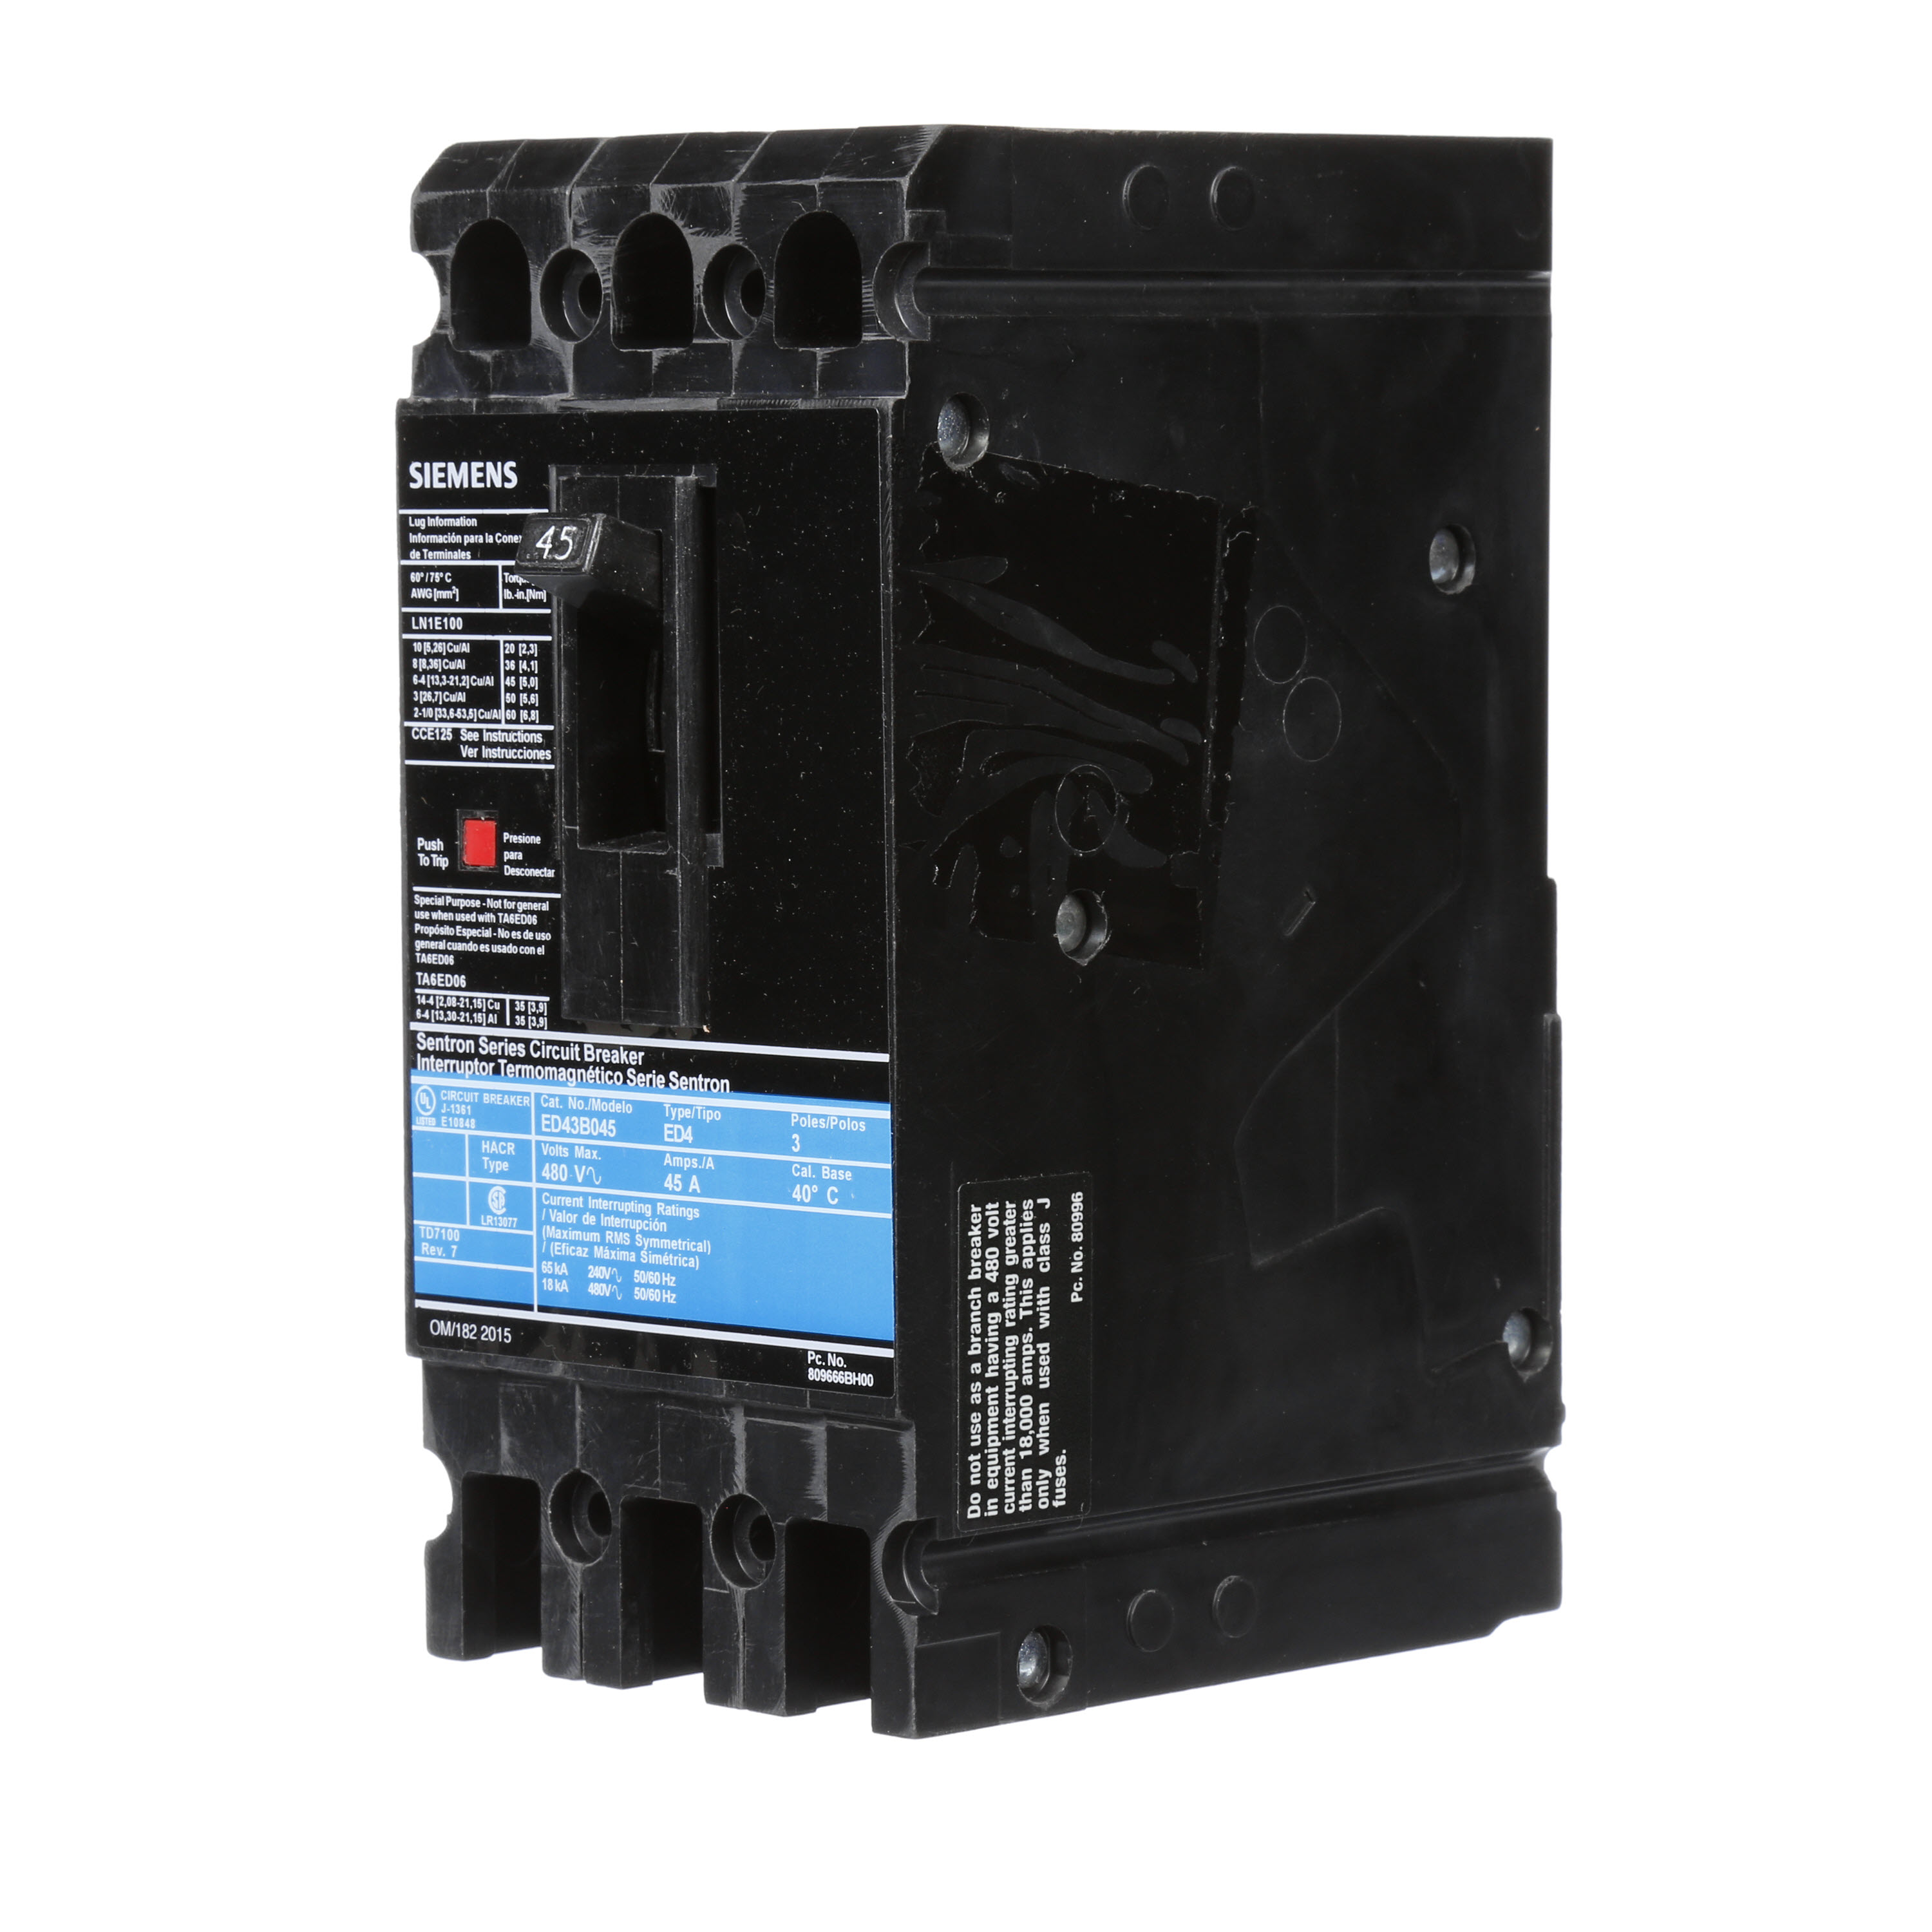 SIEMENS LOW VOLTAGE SENTRON MOLDED CASE CIRCUIT BREAKER WITH THERMAL - MAGNETICTRIP UNIT. STANDARD 40 DEG C BREAKER ED FRAME WITH STANDARD BREAKING CAPACITY. 45A 3-POLE (18KAIC AT 480V). NON-INTERCHANGEABLE TRIP UNIT. SPECIAL FEATURES LINE AND LOAD SIDE LUGS (LN1E100) WIRE RANGE 10 - 1/0AWG (CU/AL). DIMENSIONS (W x Hx D) IN 3.00 x 6.4 x 3.92.